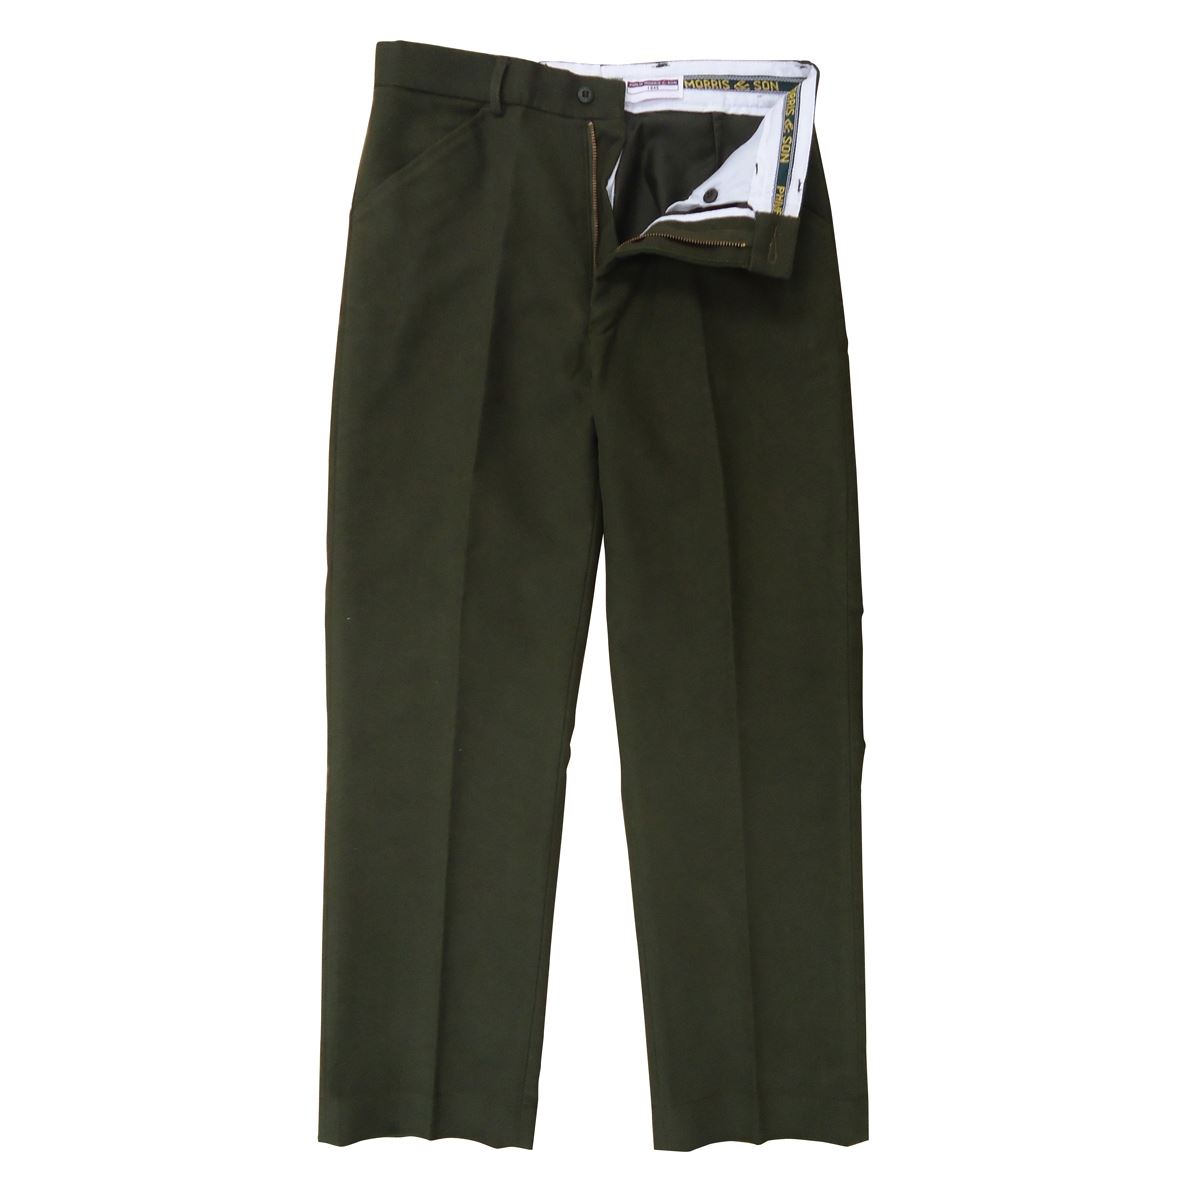 Are these mens moleskin trousers suitable for shooting?